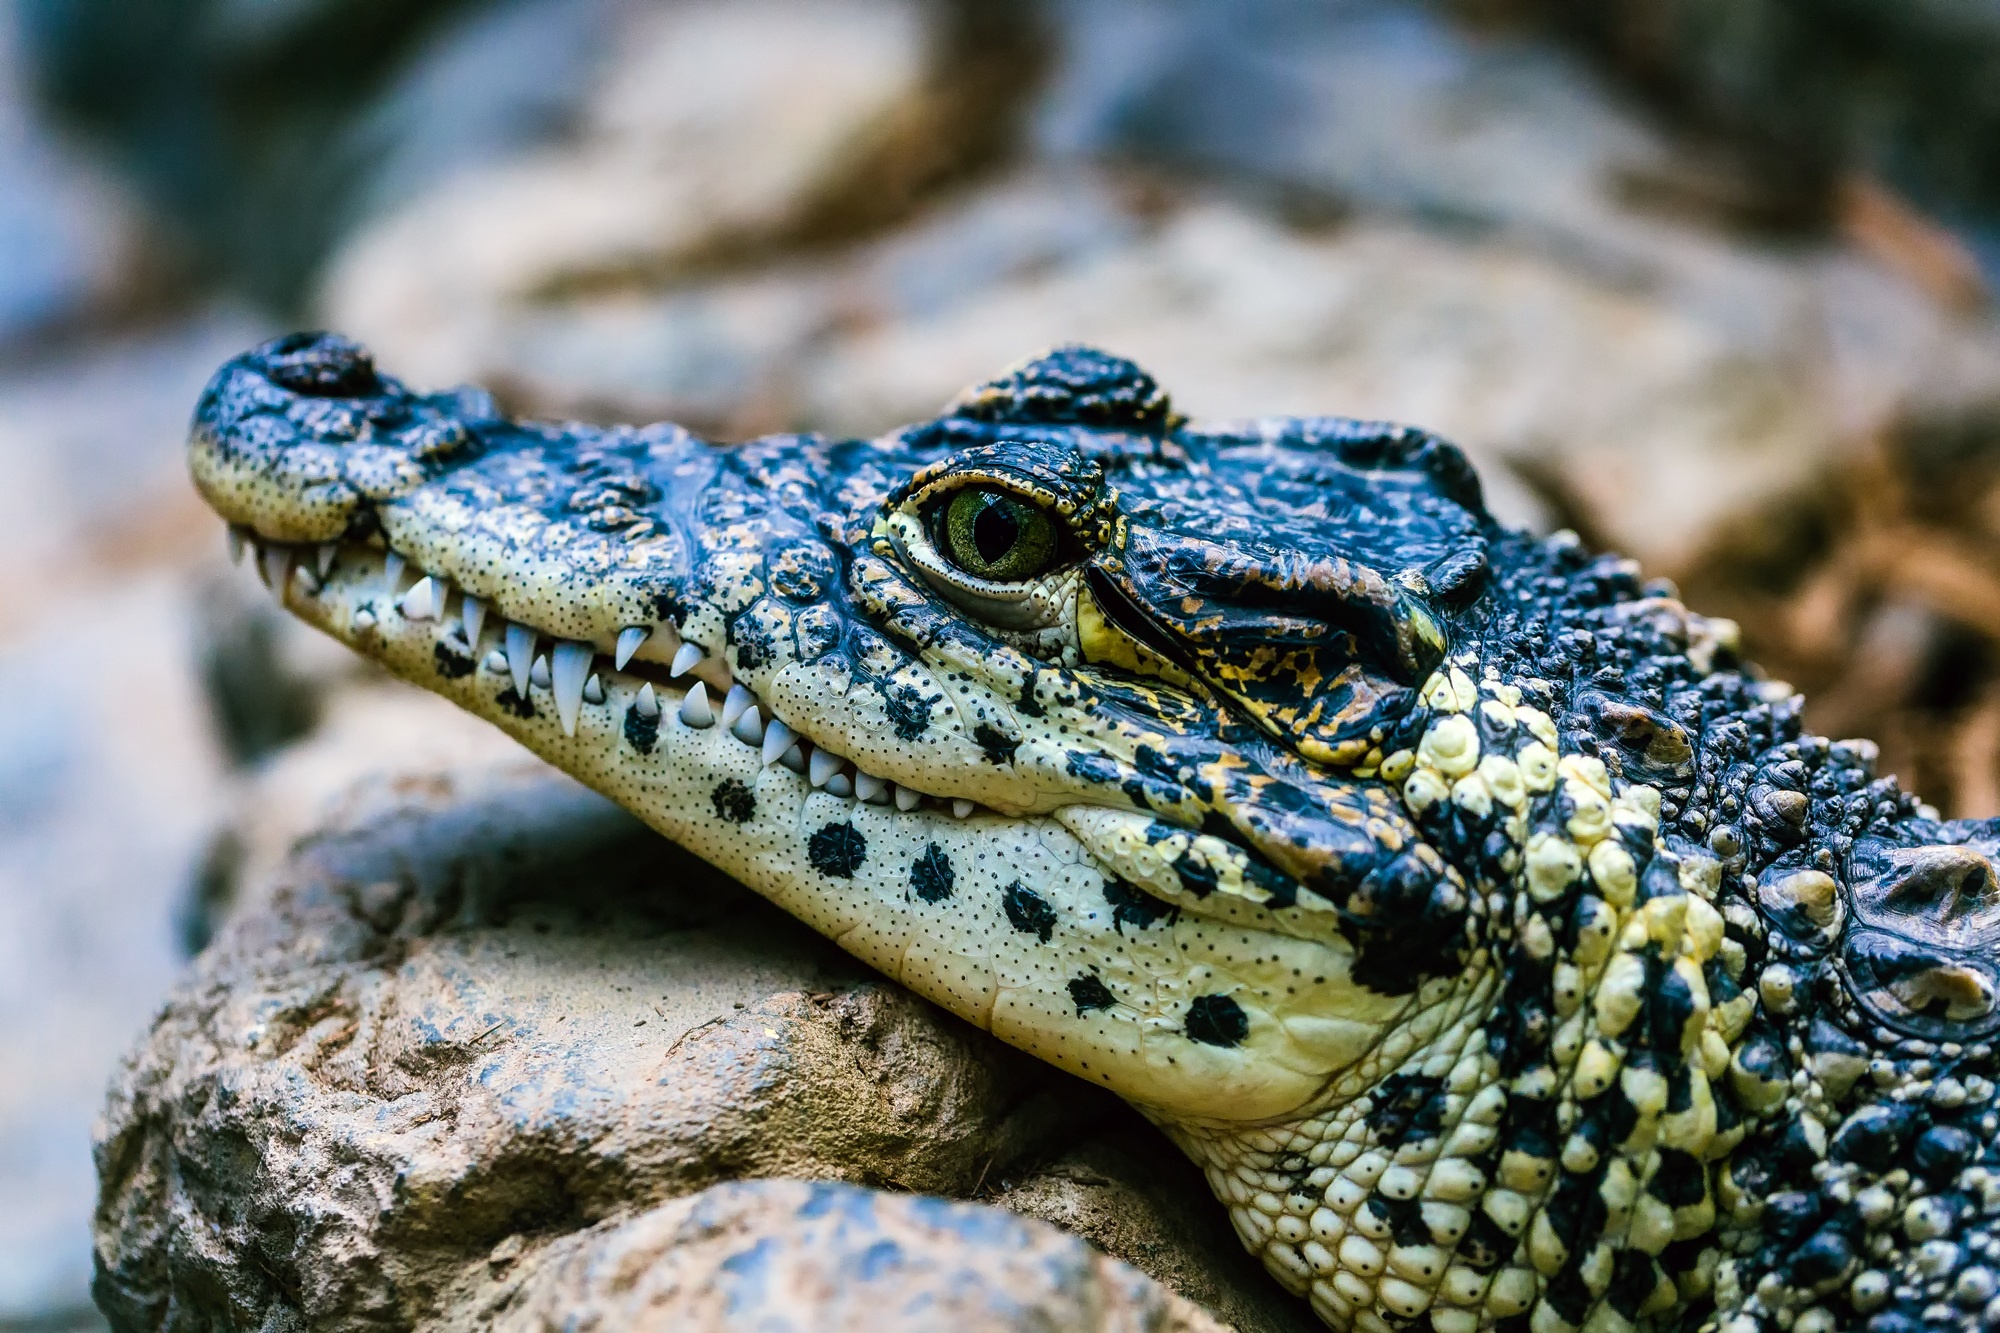 Crocodile: Hatchlings primarily survive on water insects like snails, crustaceans, frogs. 2000x1340 HD Wallpaper.